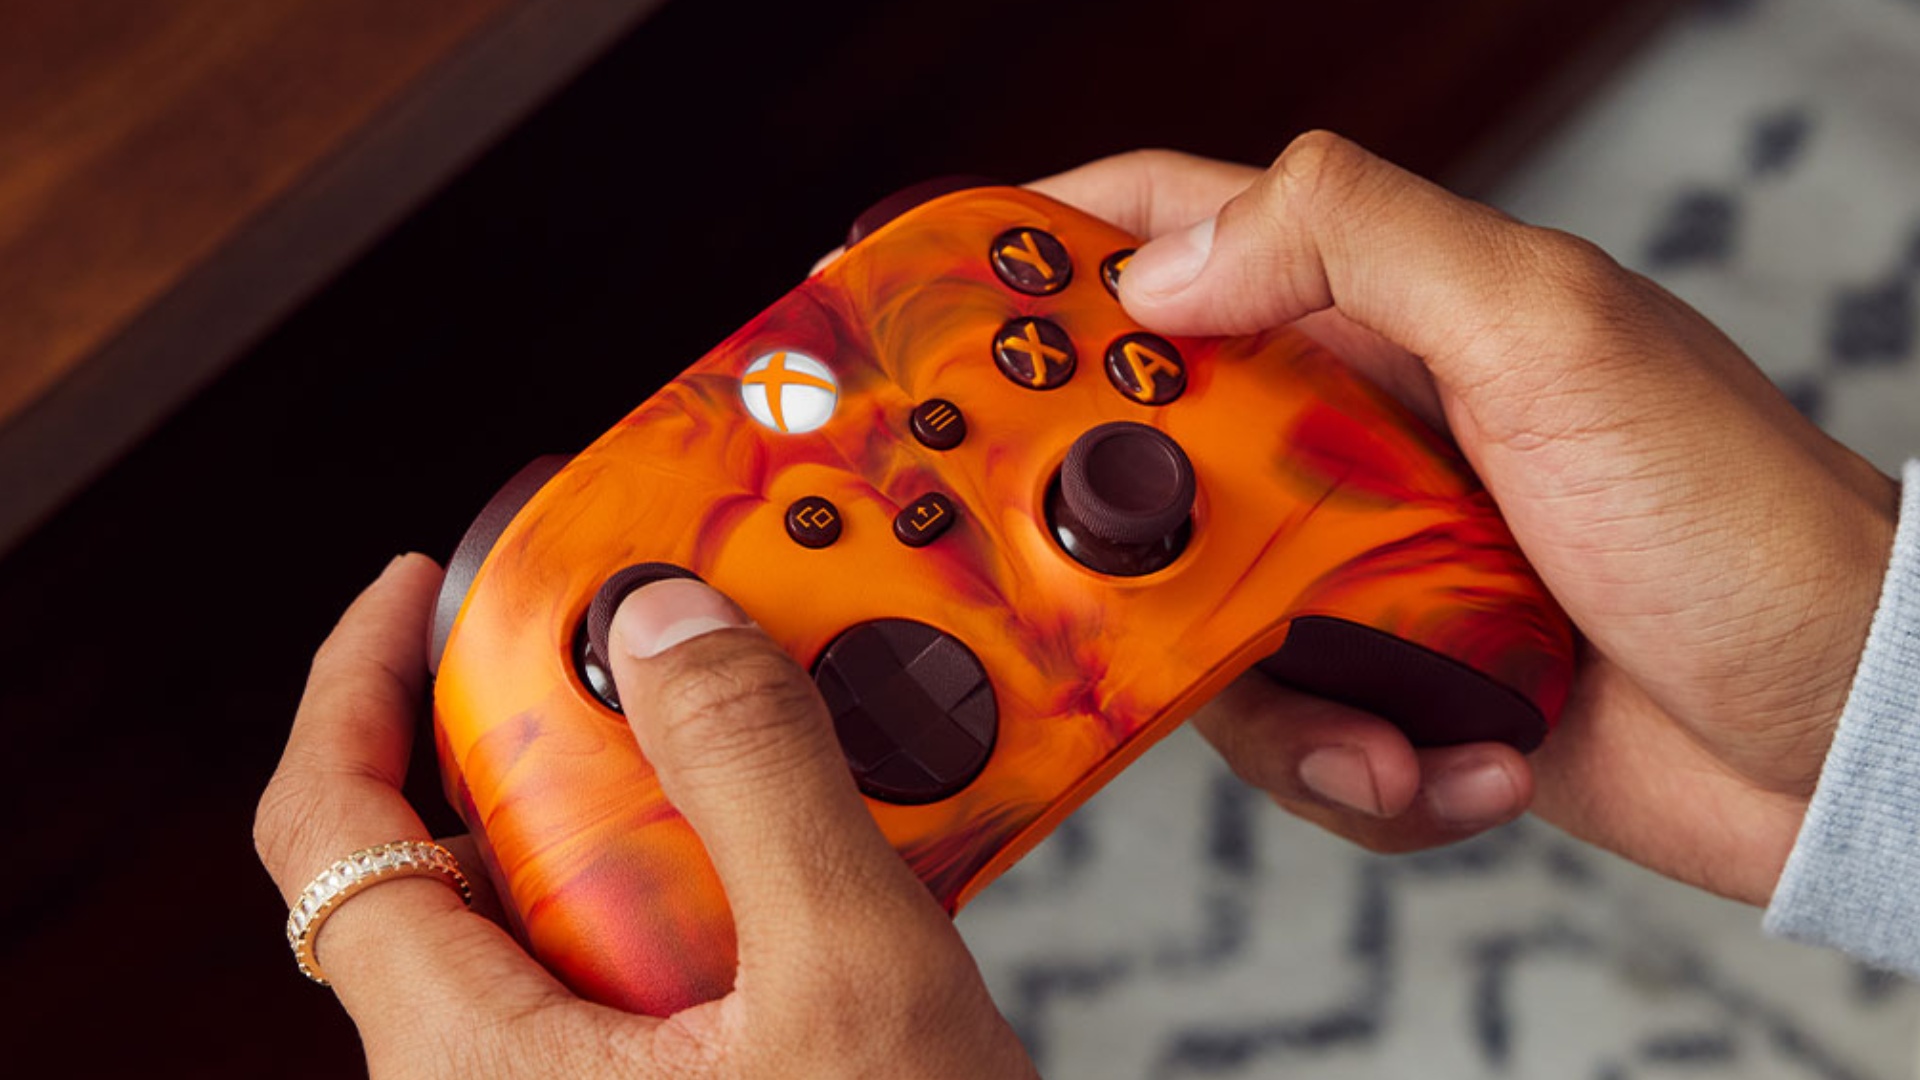 Add a bit of heat to your Xbox setup with the new Fire Vapor Special Edition controller